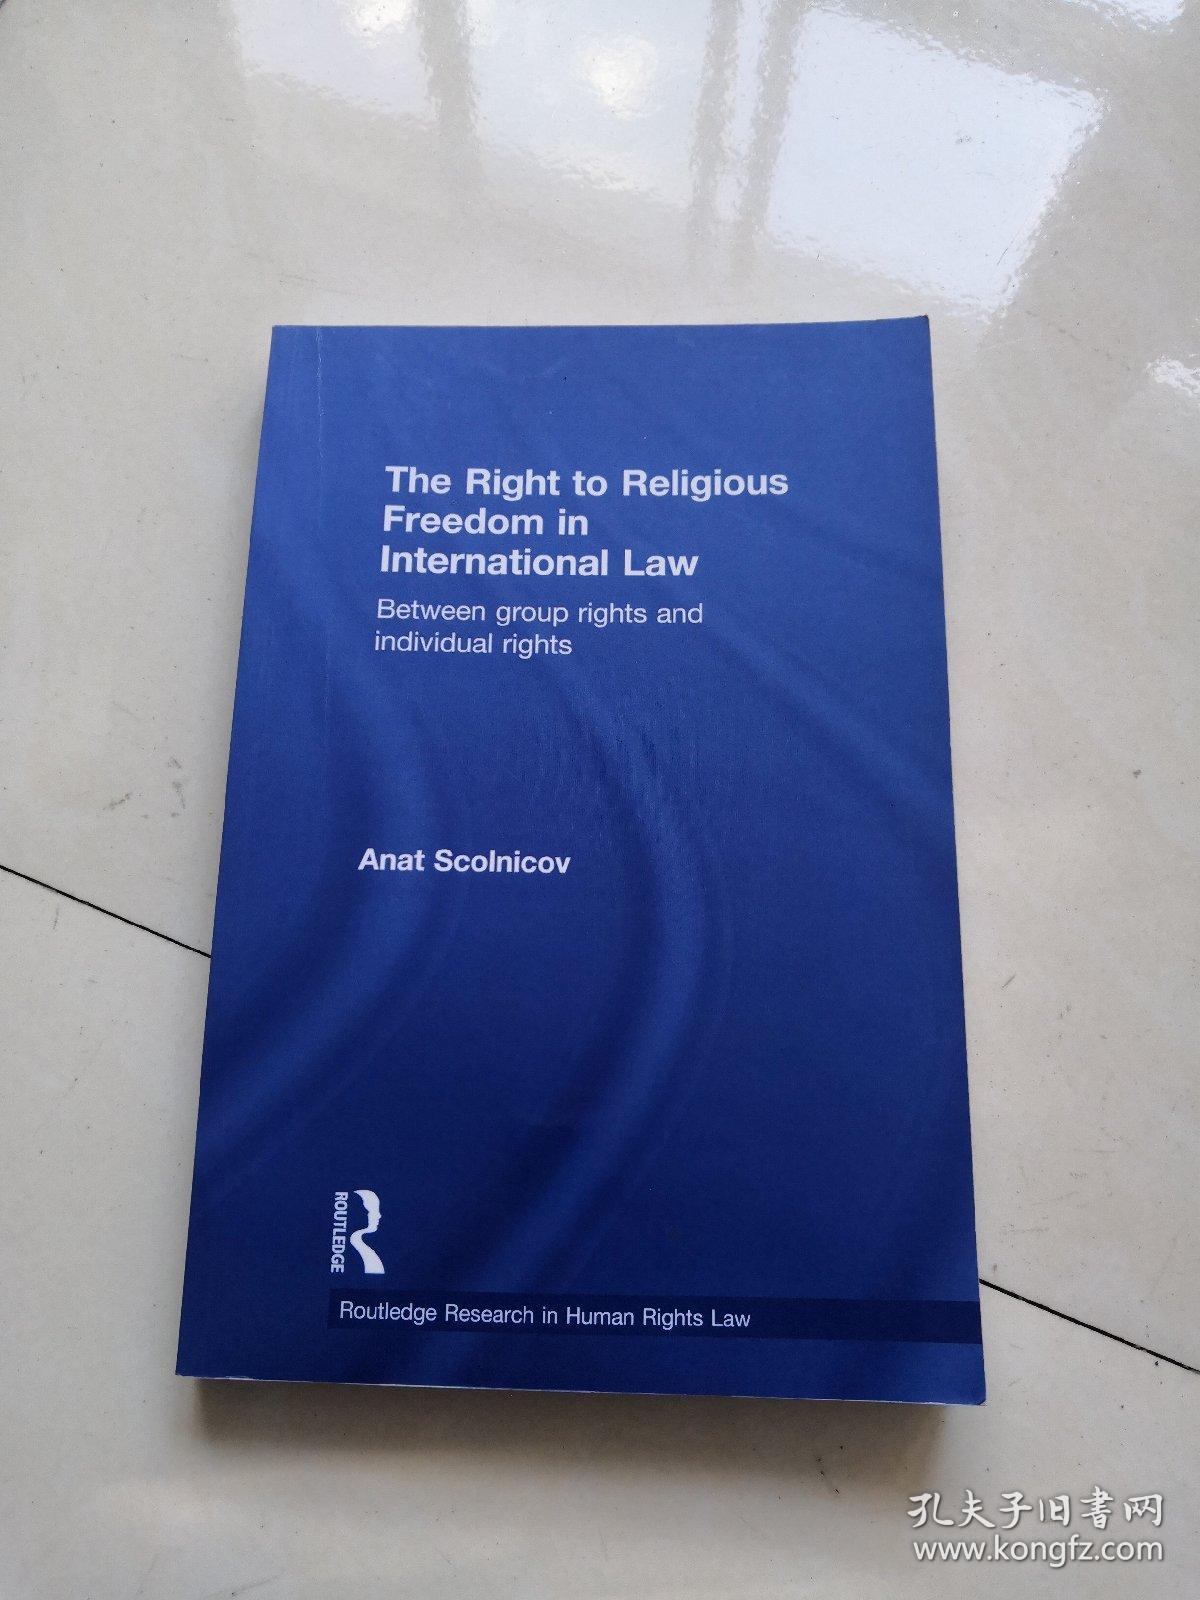 The Right to Religious Freedom in International Law